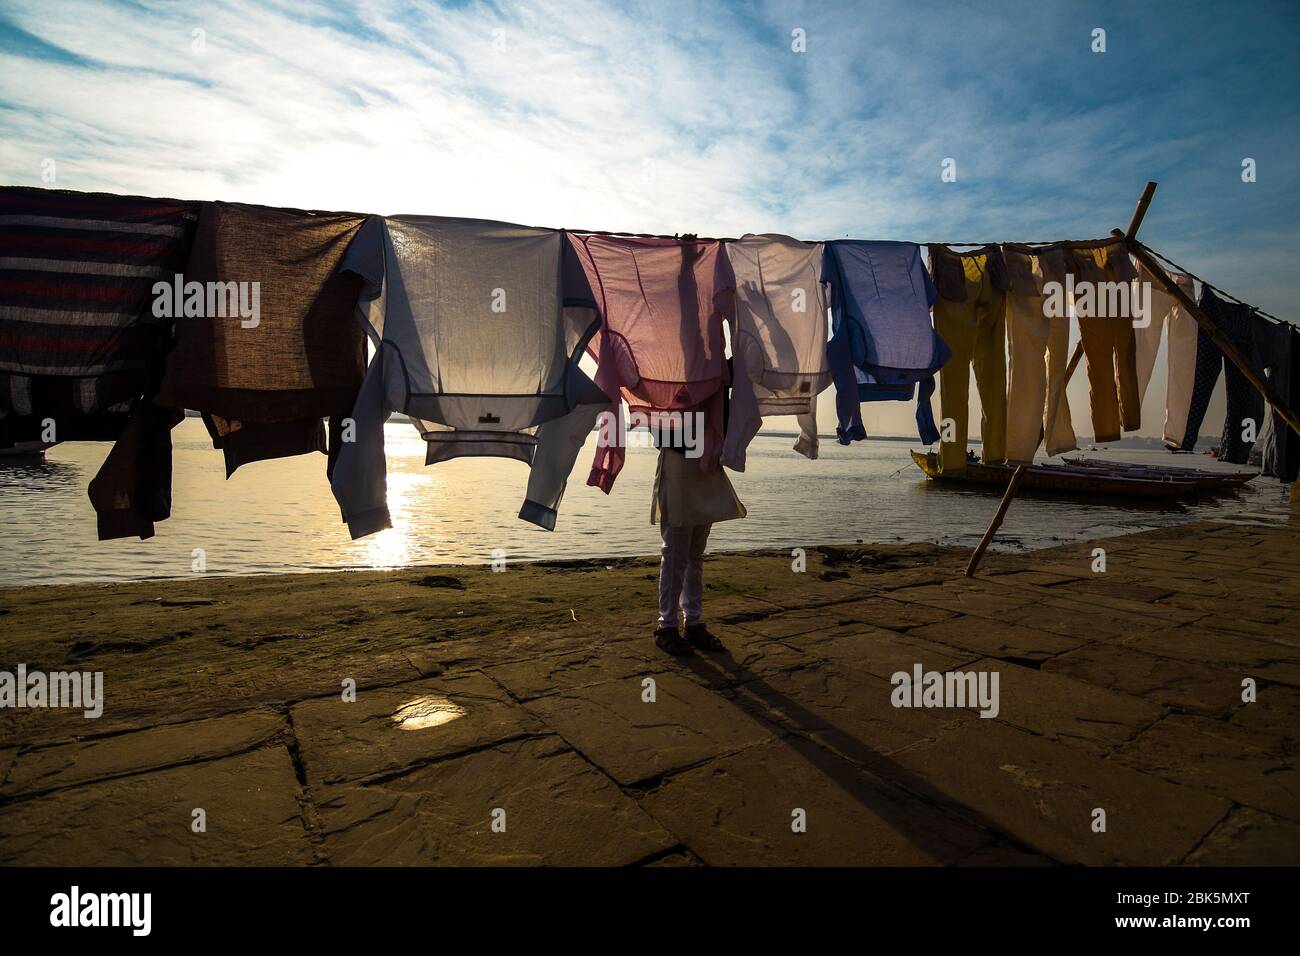 Laundry boy makes his clothes dry on the bank of river Ganges at Varanasi ghat in Uttar Pradesh, India. Stock Photo